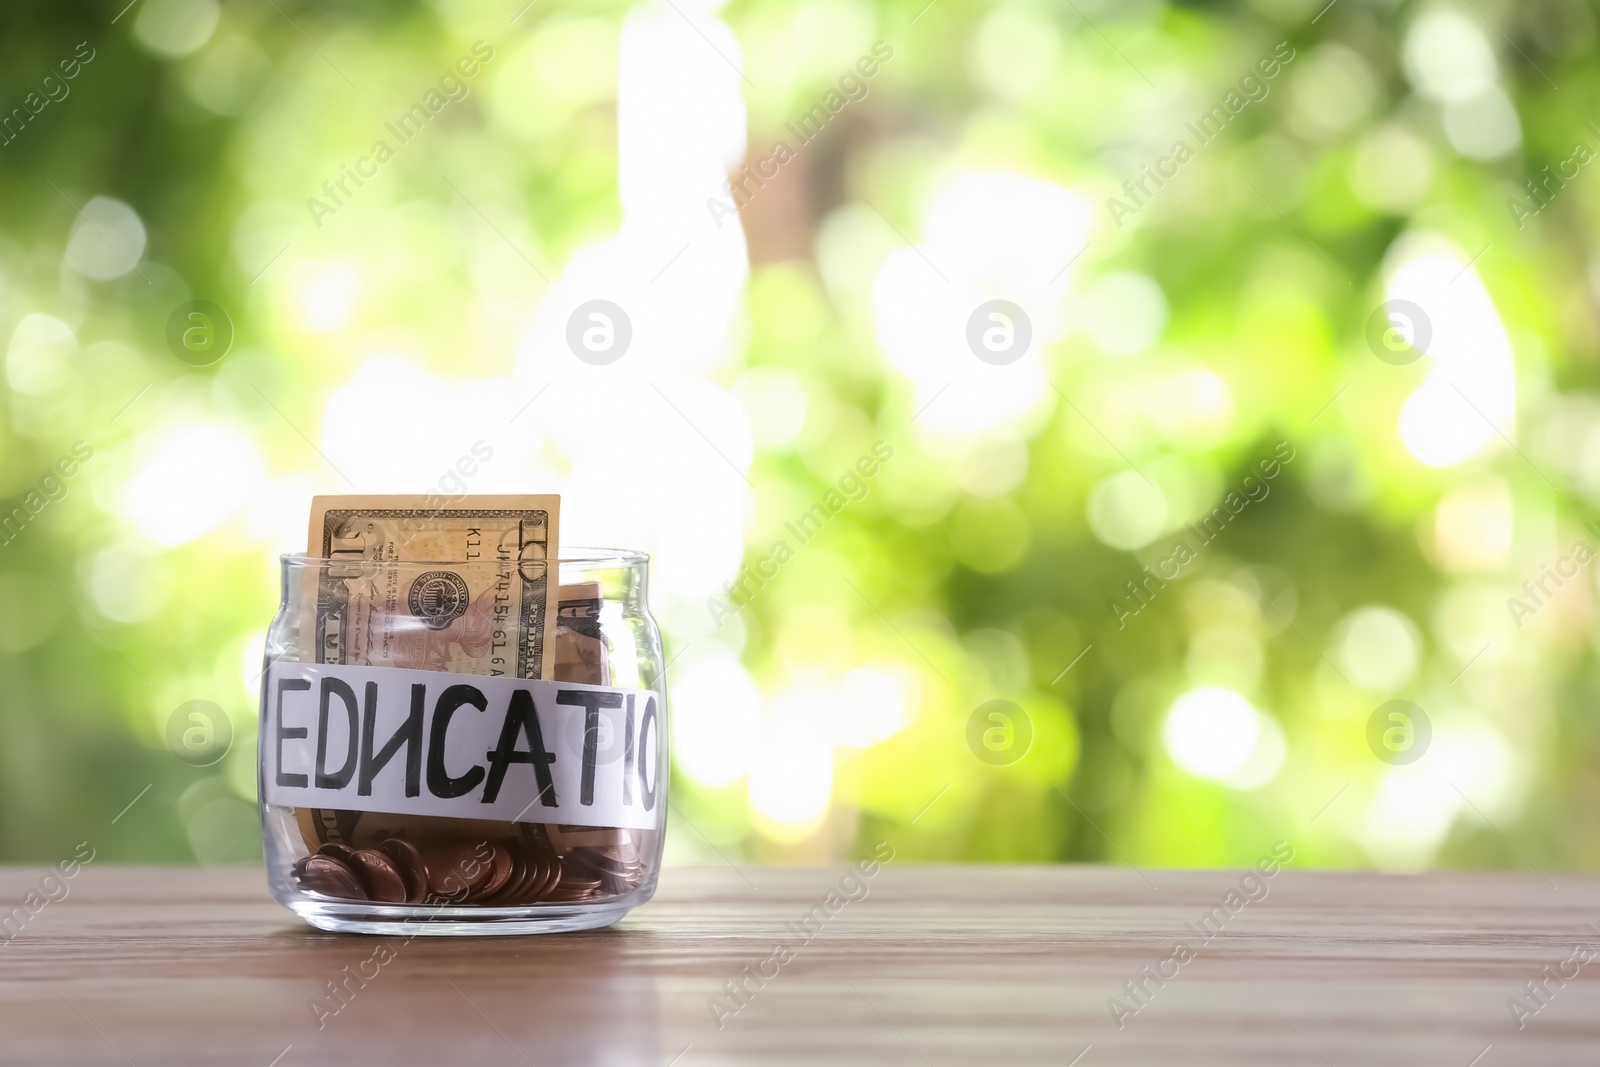 Photo of Glass jar with money and word EDUCATION on table against blurred background, space for text